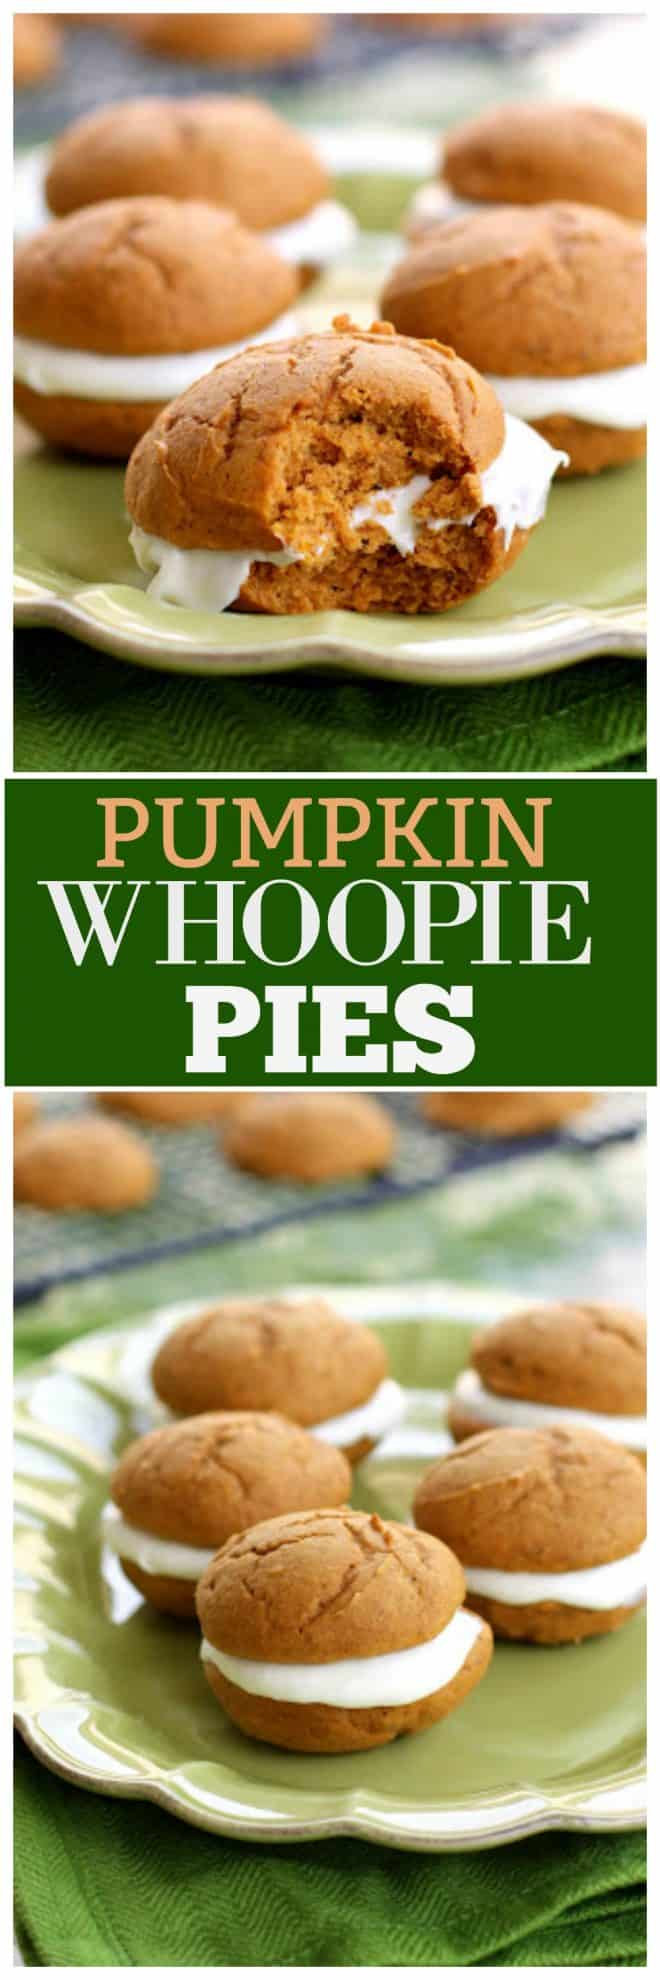 Pumpkin Whoopie Pies - The Girl Who Ate Everything